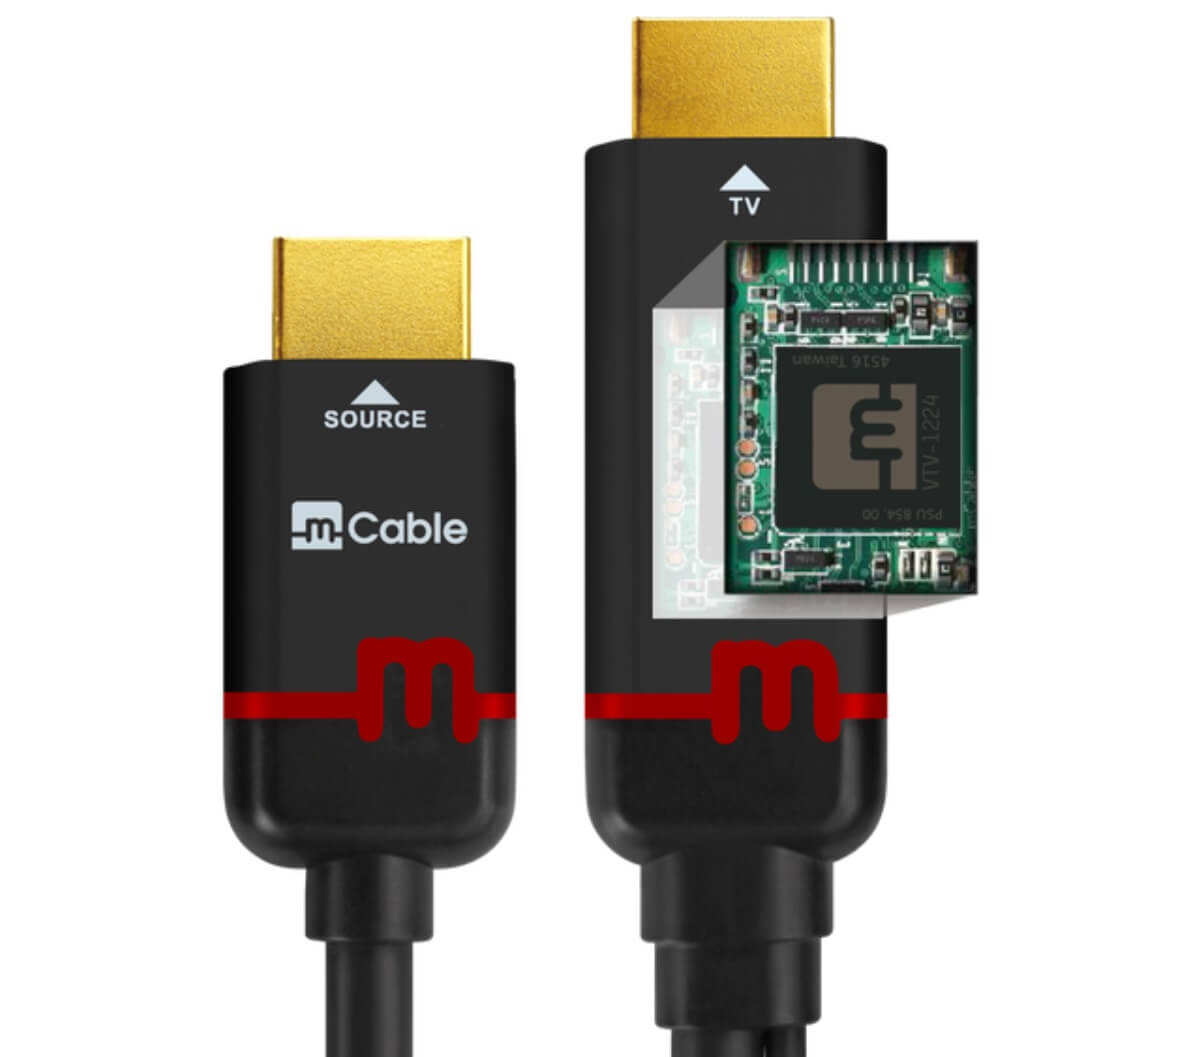 This $119 HDMI cable has an embedded digital signal processor that can remove aliasing